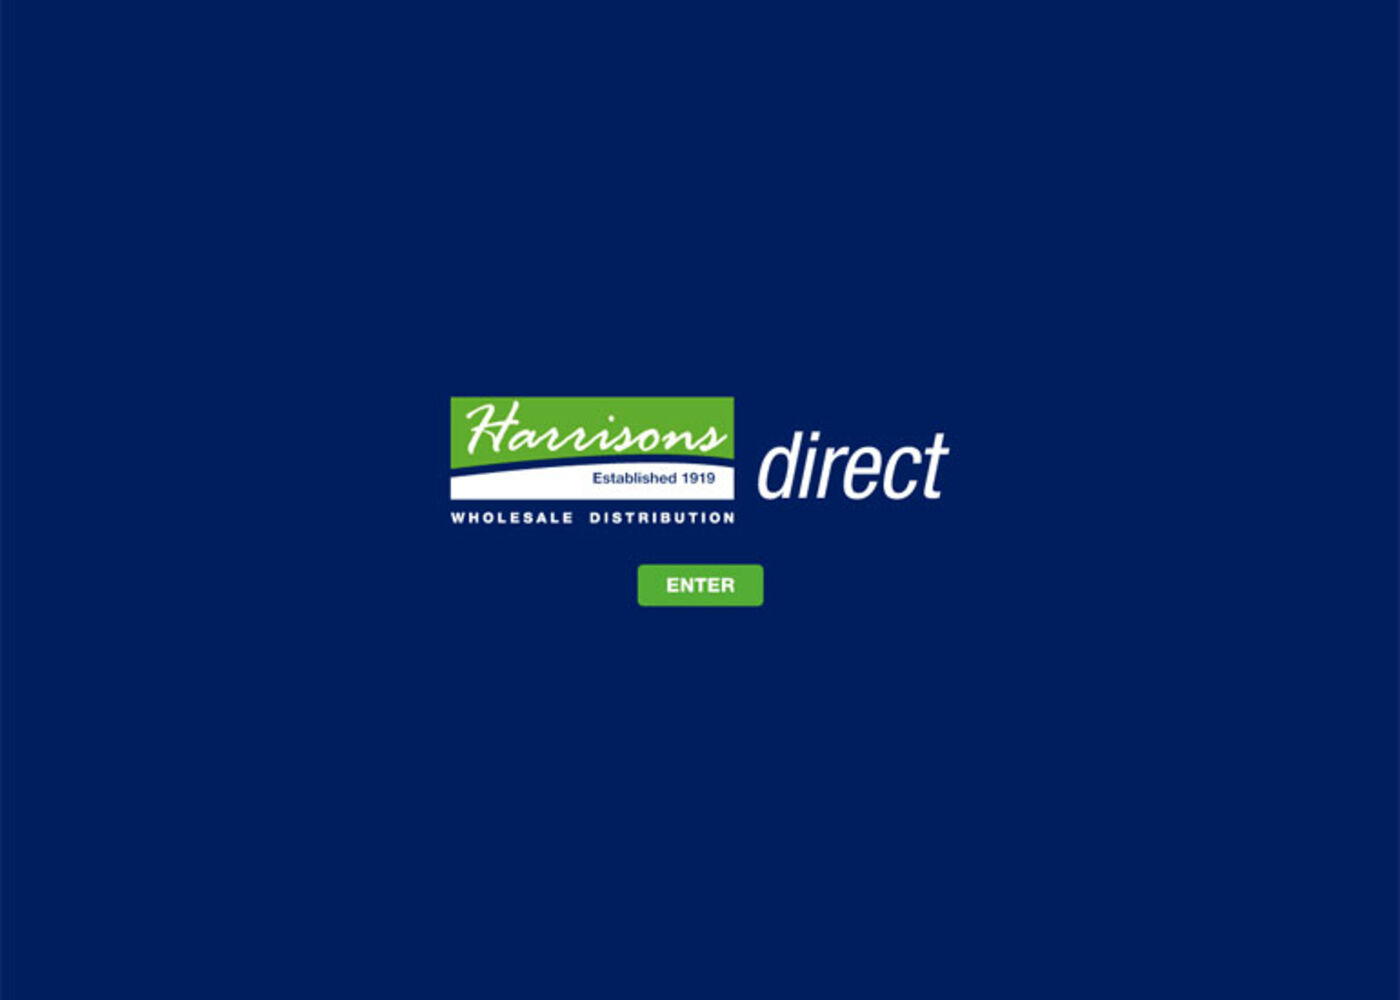 Harrisons Direct (2008) Welcome